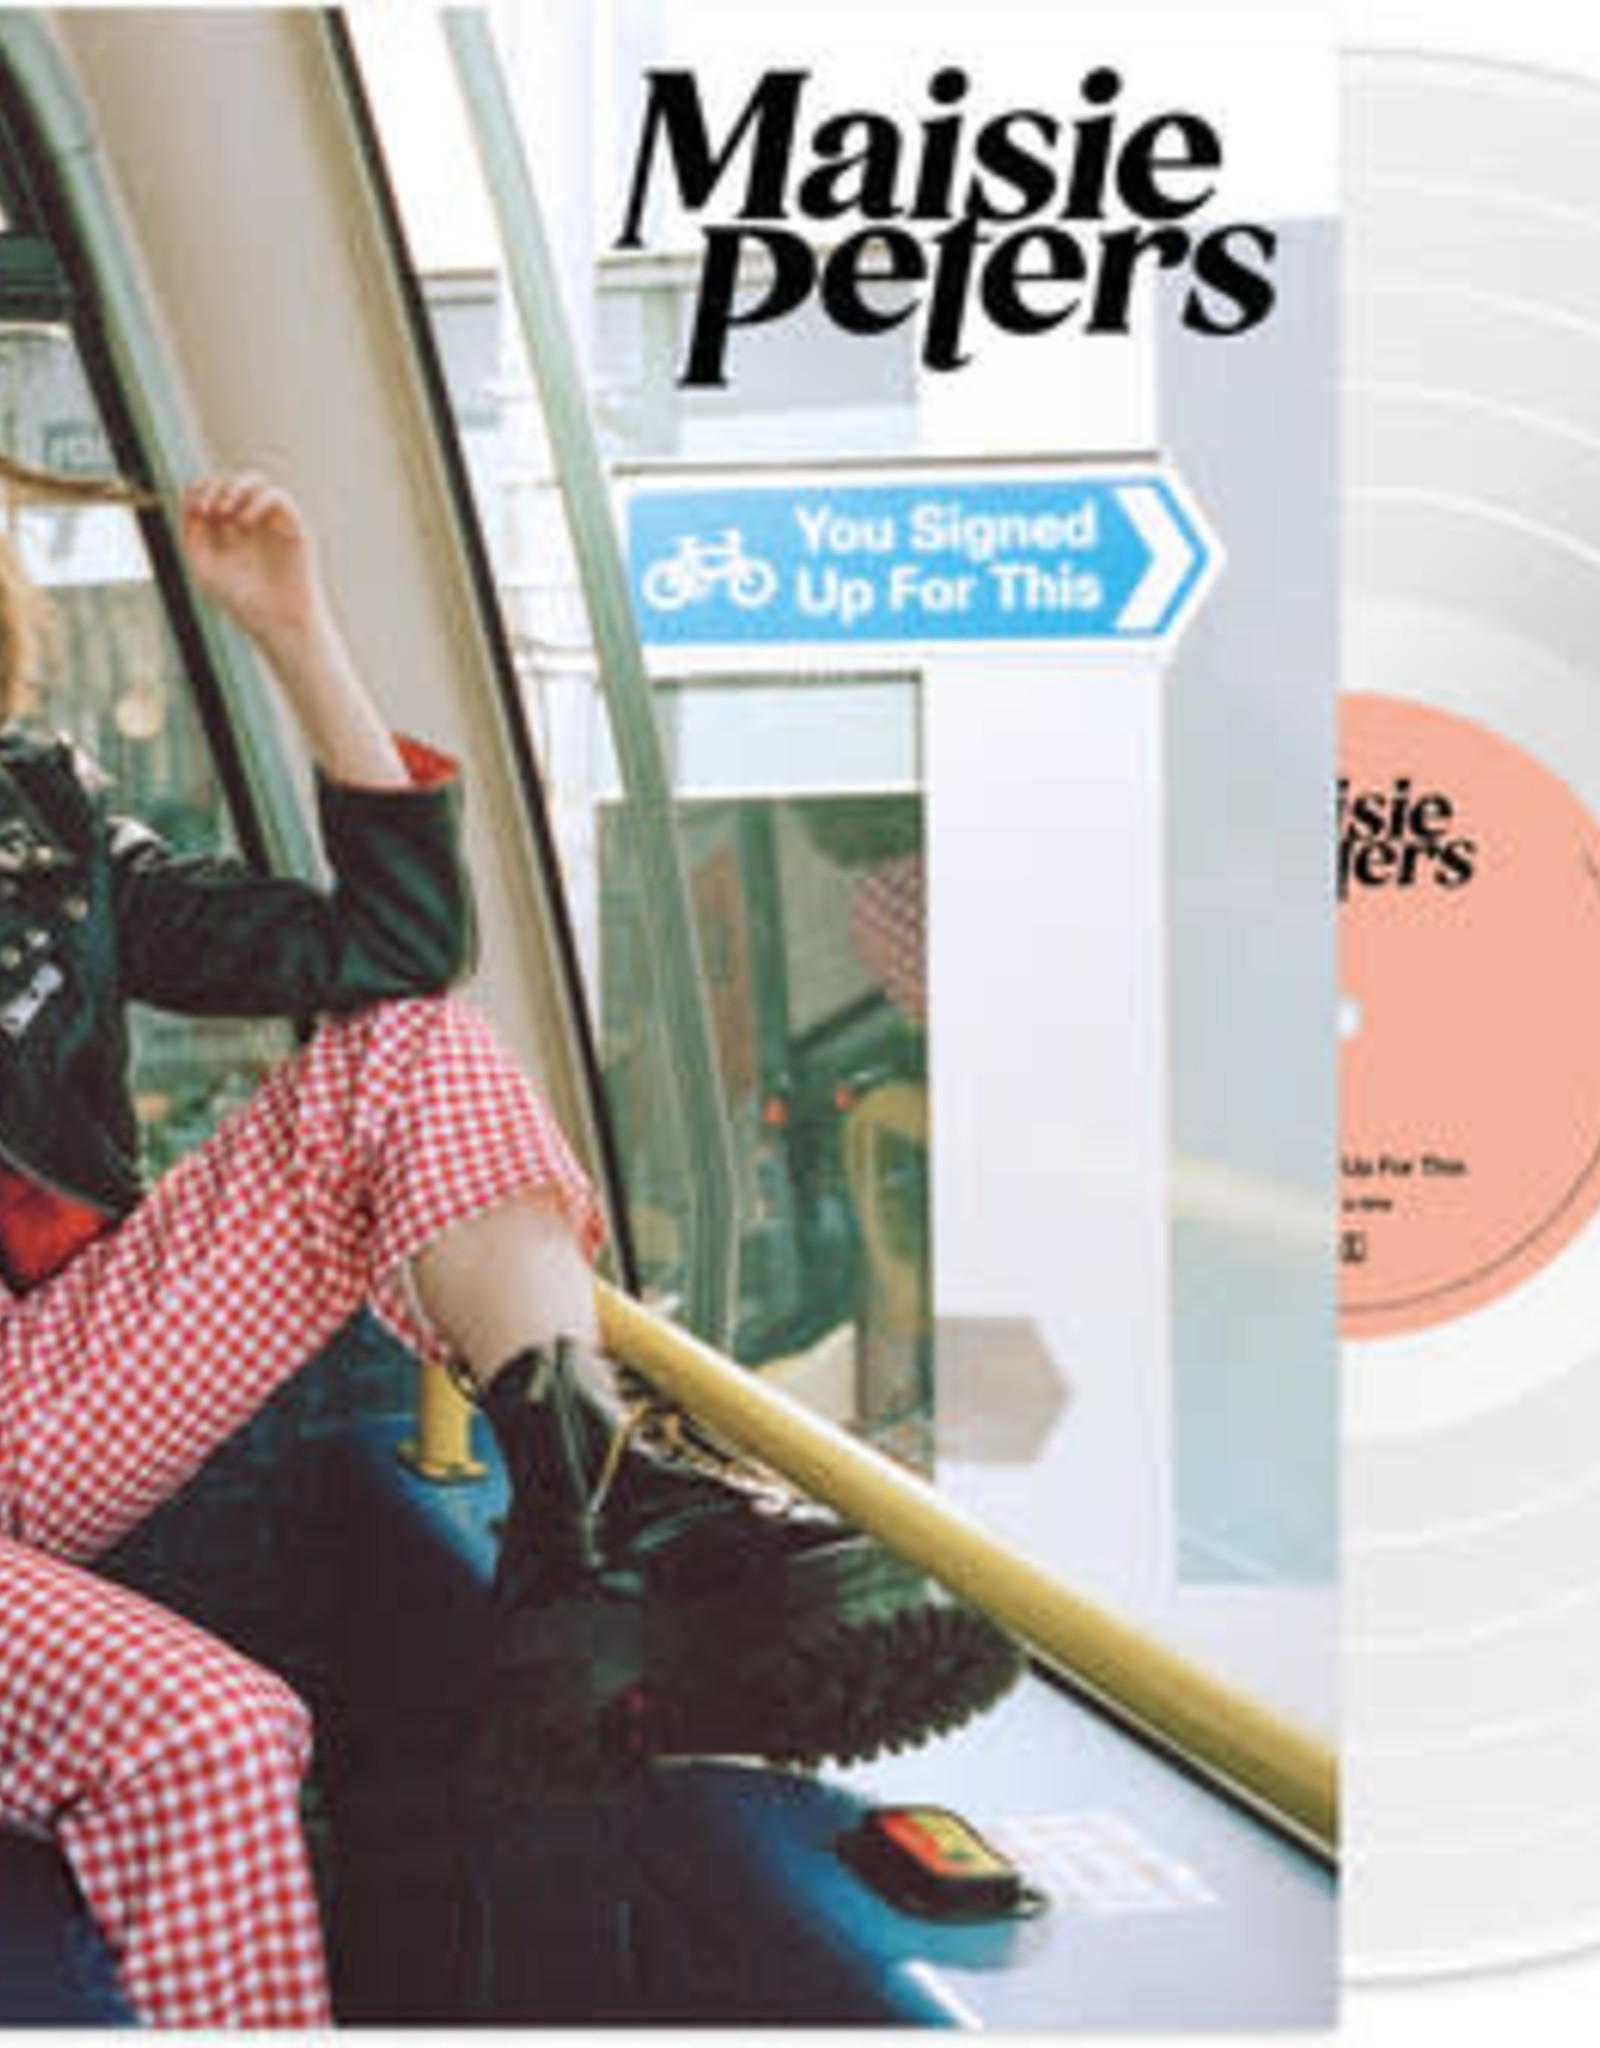 Maisie Peters - You Signed Up For This (White Vinyl)